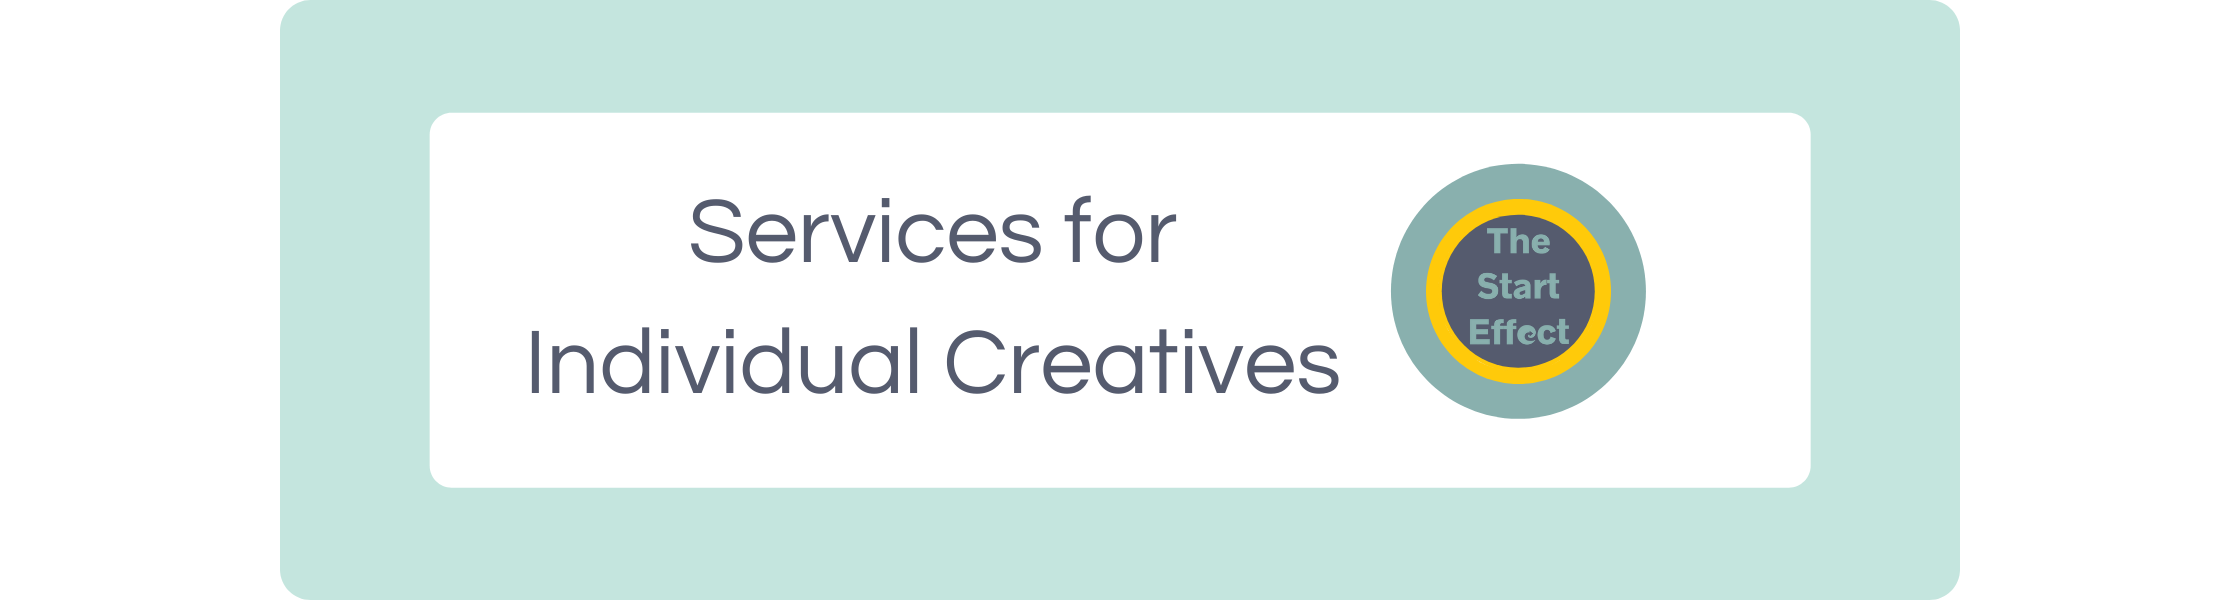 Services for individual creatives button in light teal border